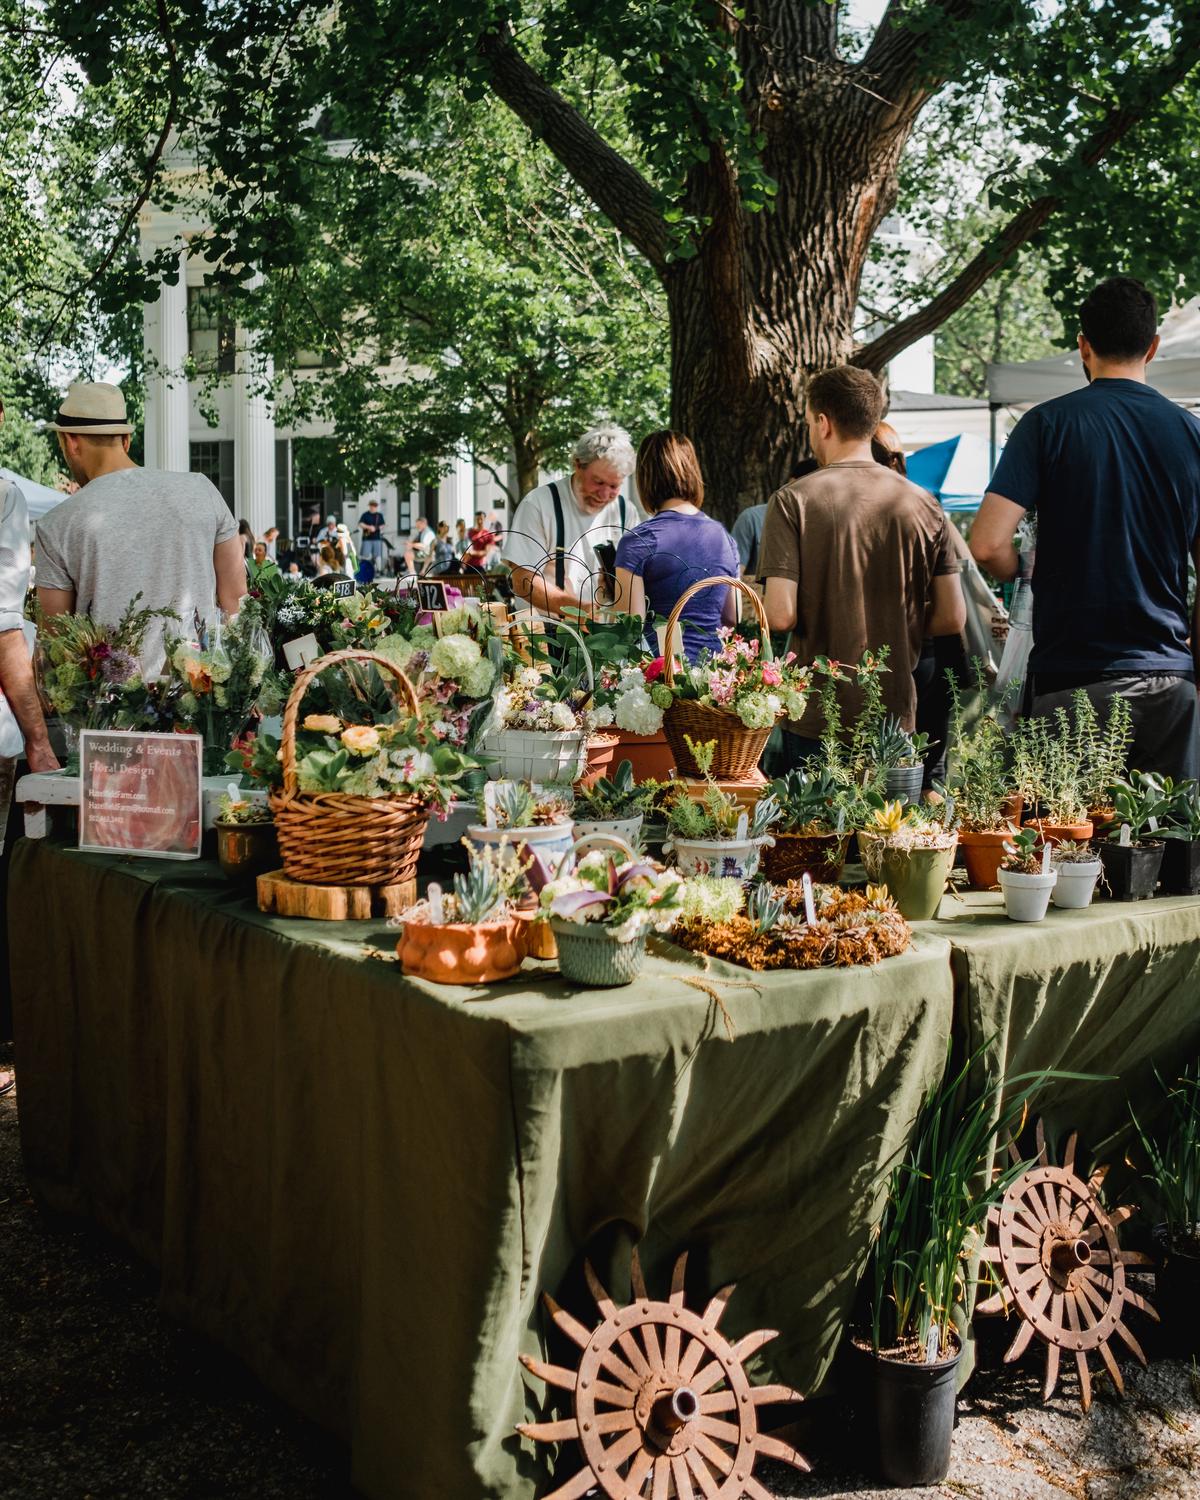 An image of a vibrant farmers' market bustling with activities, shoppers looking over farm stands, and vendors selling different types of produce.